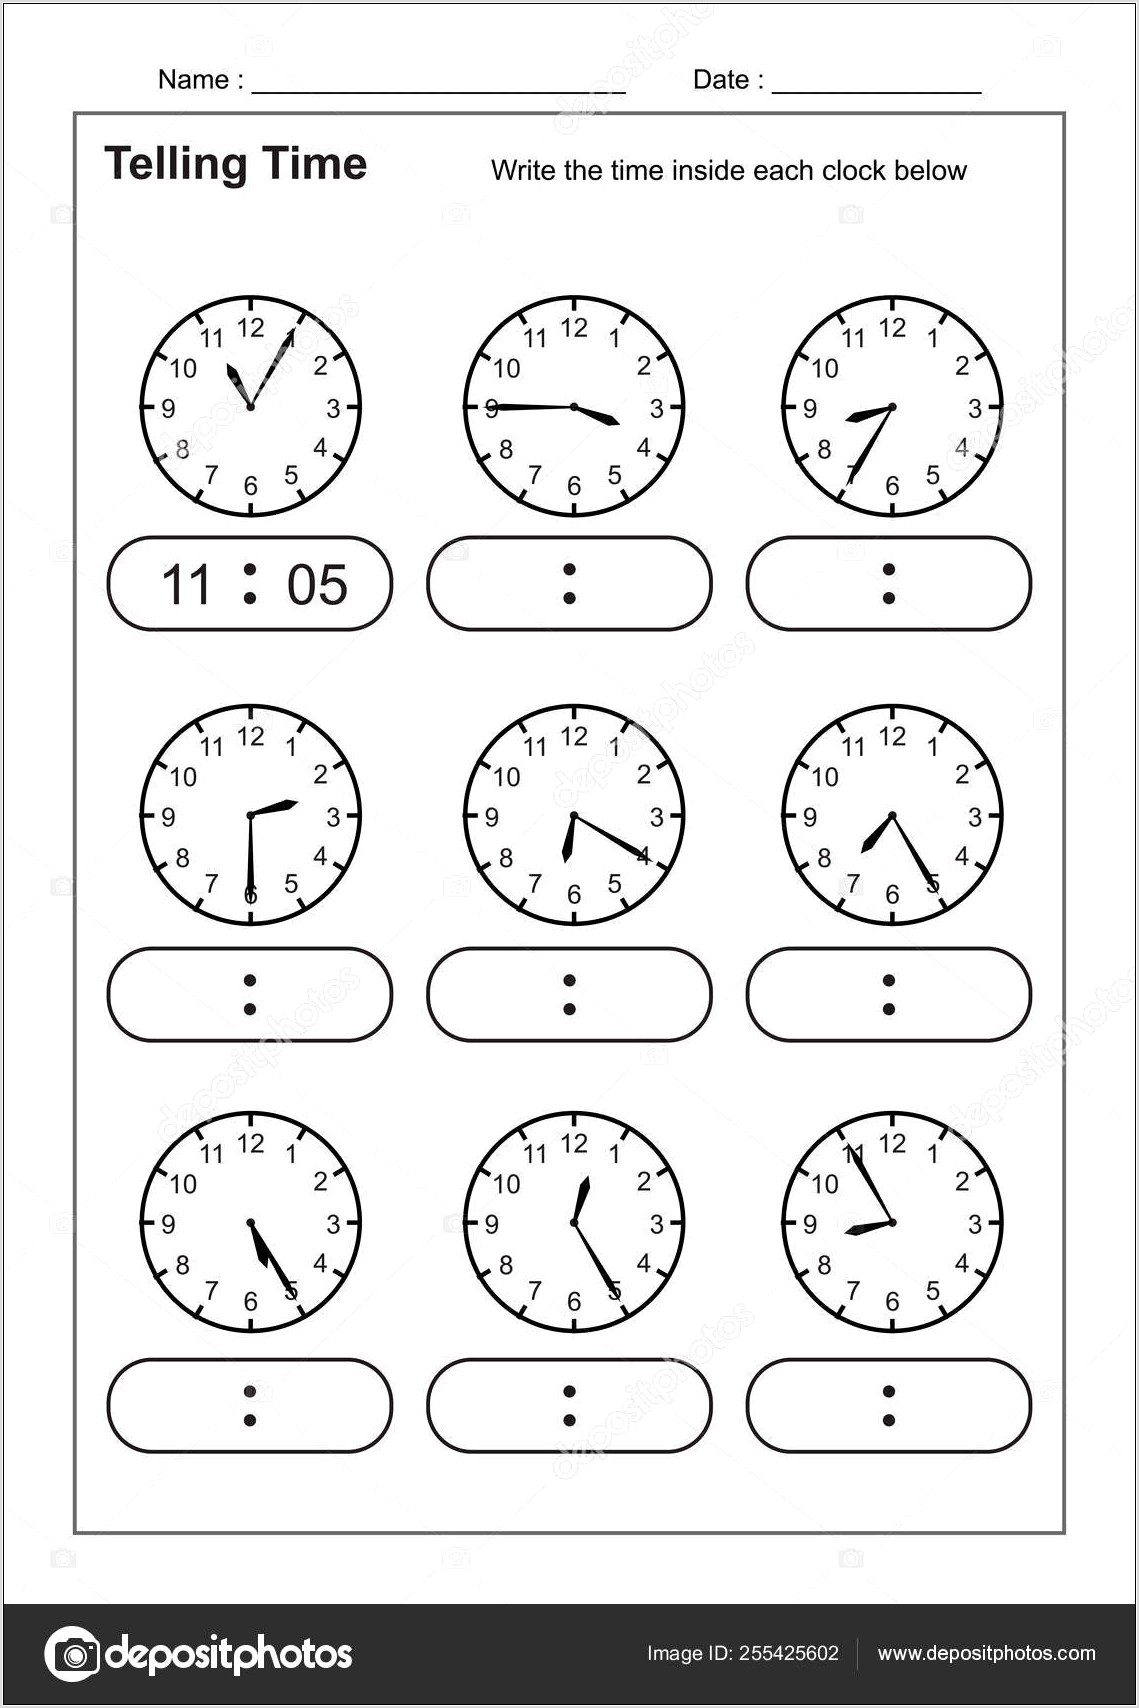 Practice Time Telling Worksheets